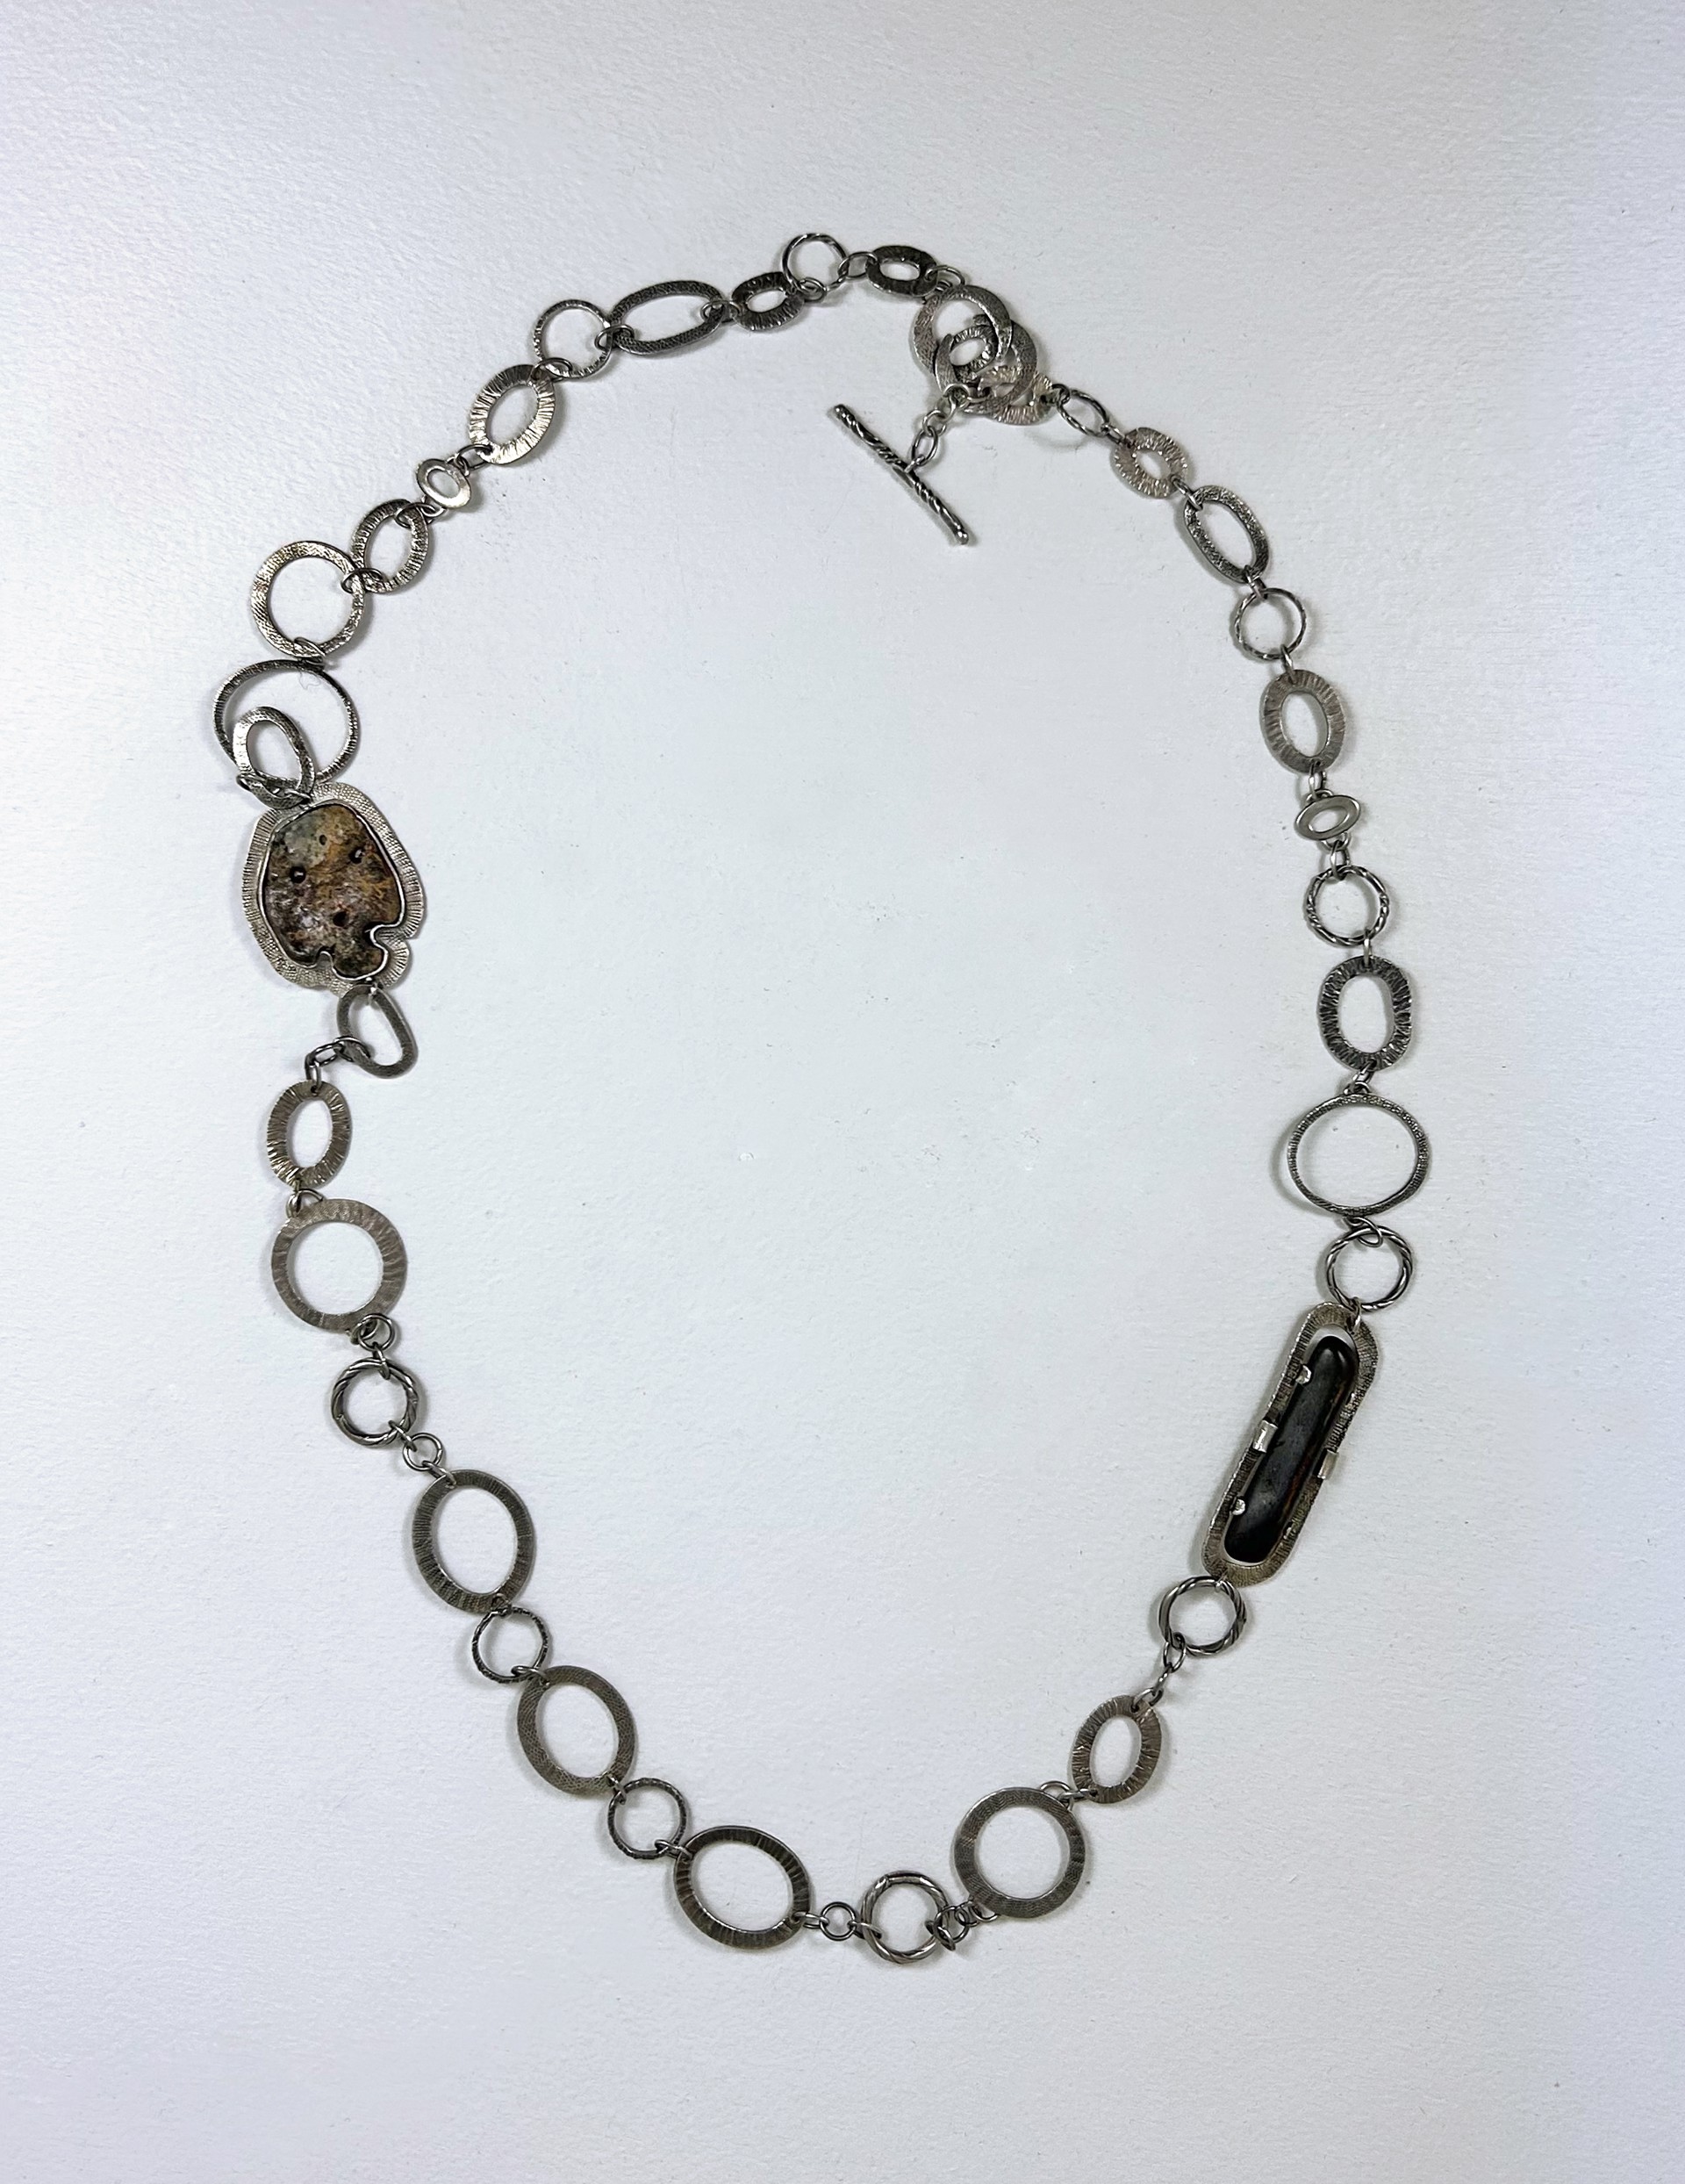 Beach Rock and Bone necklace by Beth Lonsinger